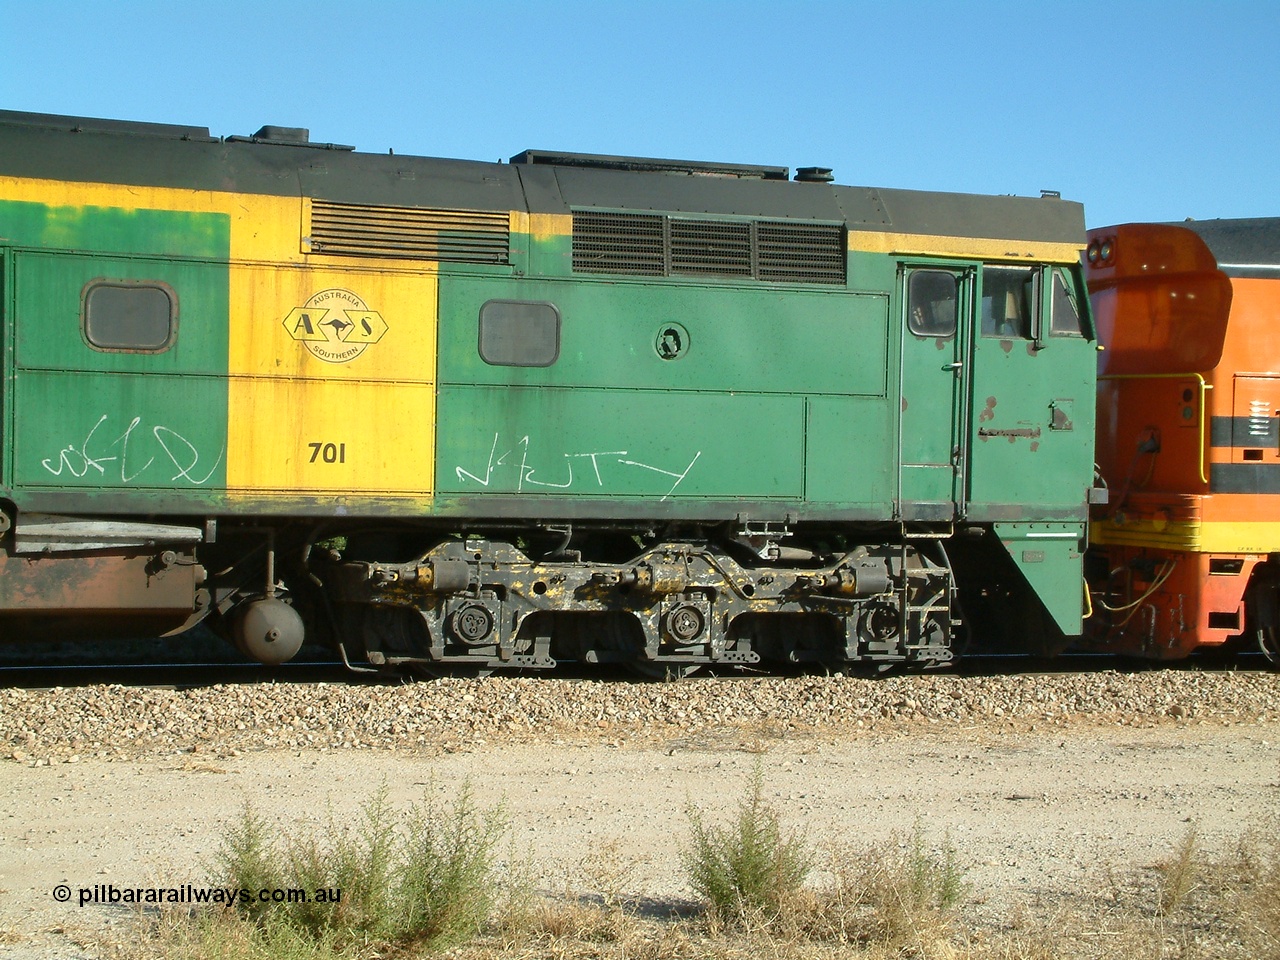 030403 154951
Gladstone, former South Australian Railways AE Goodwin built DL500G ALCo designated the 700 class, class leader 701 serial G6042-2, B end cab side shot, leads a grain train being loaded on the 3rd April 2003.
Keywords: 700-class;701;AE-Goodwin;ALCo;DL500G;G6042-2;